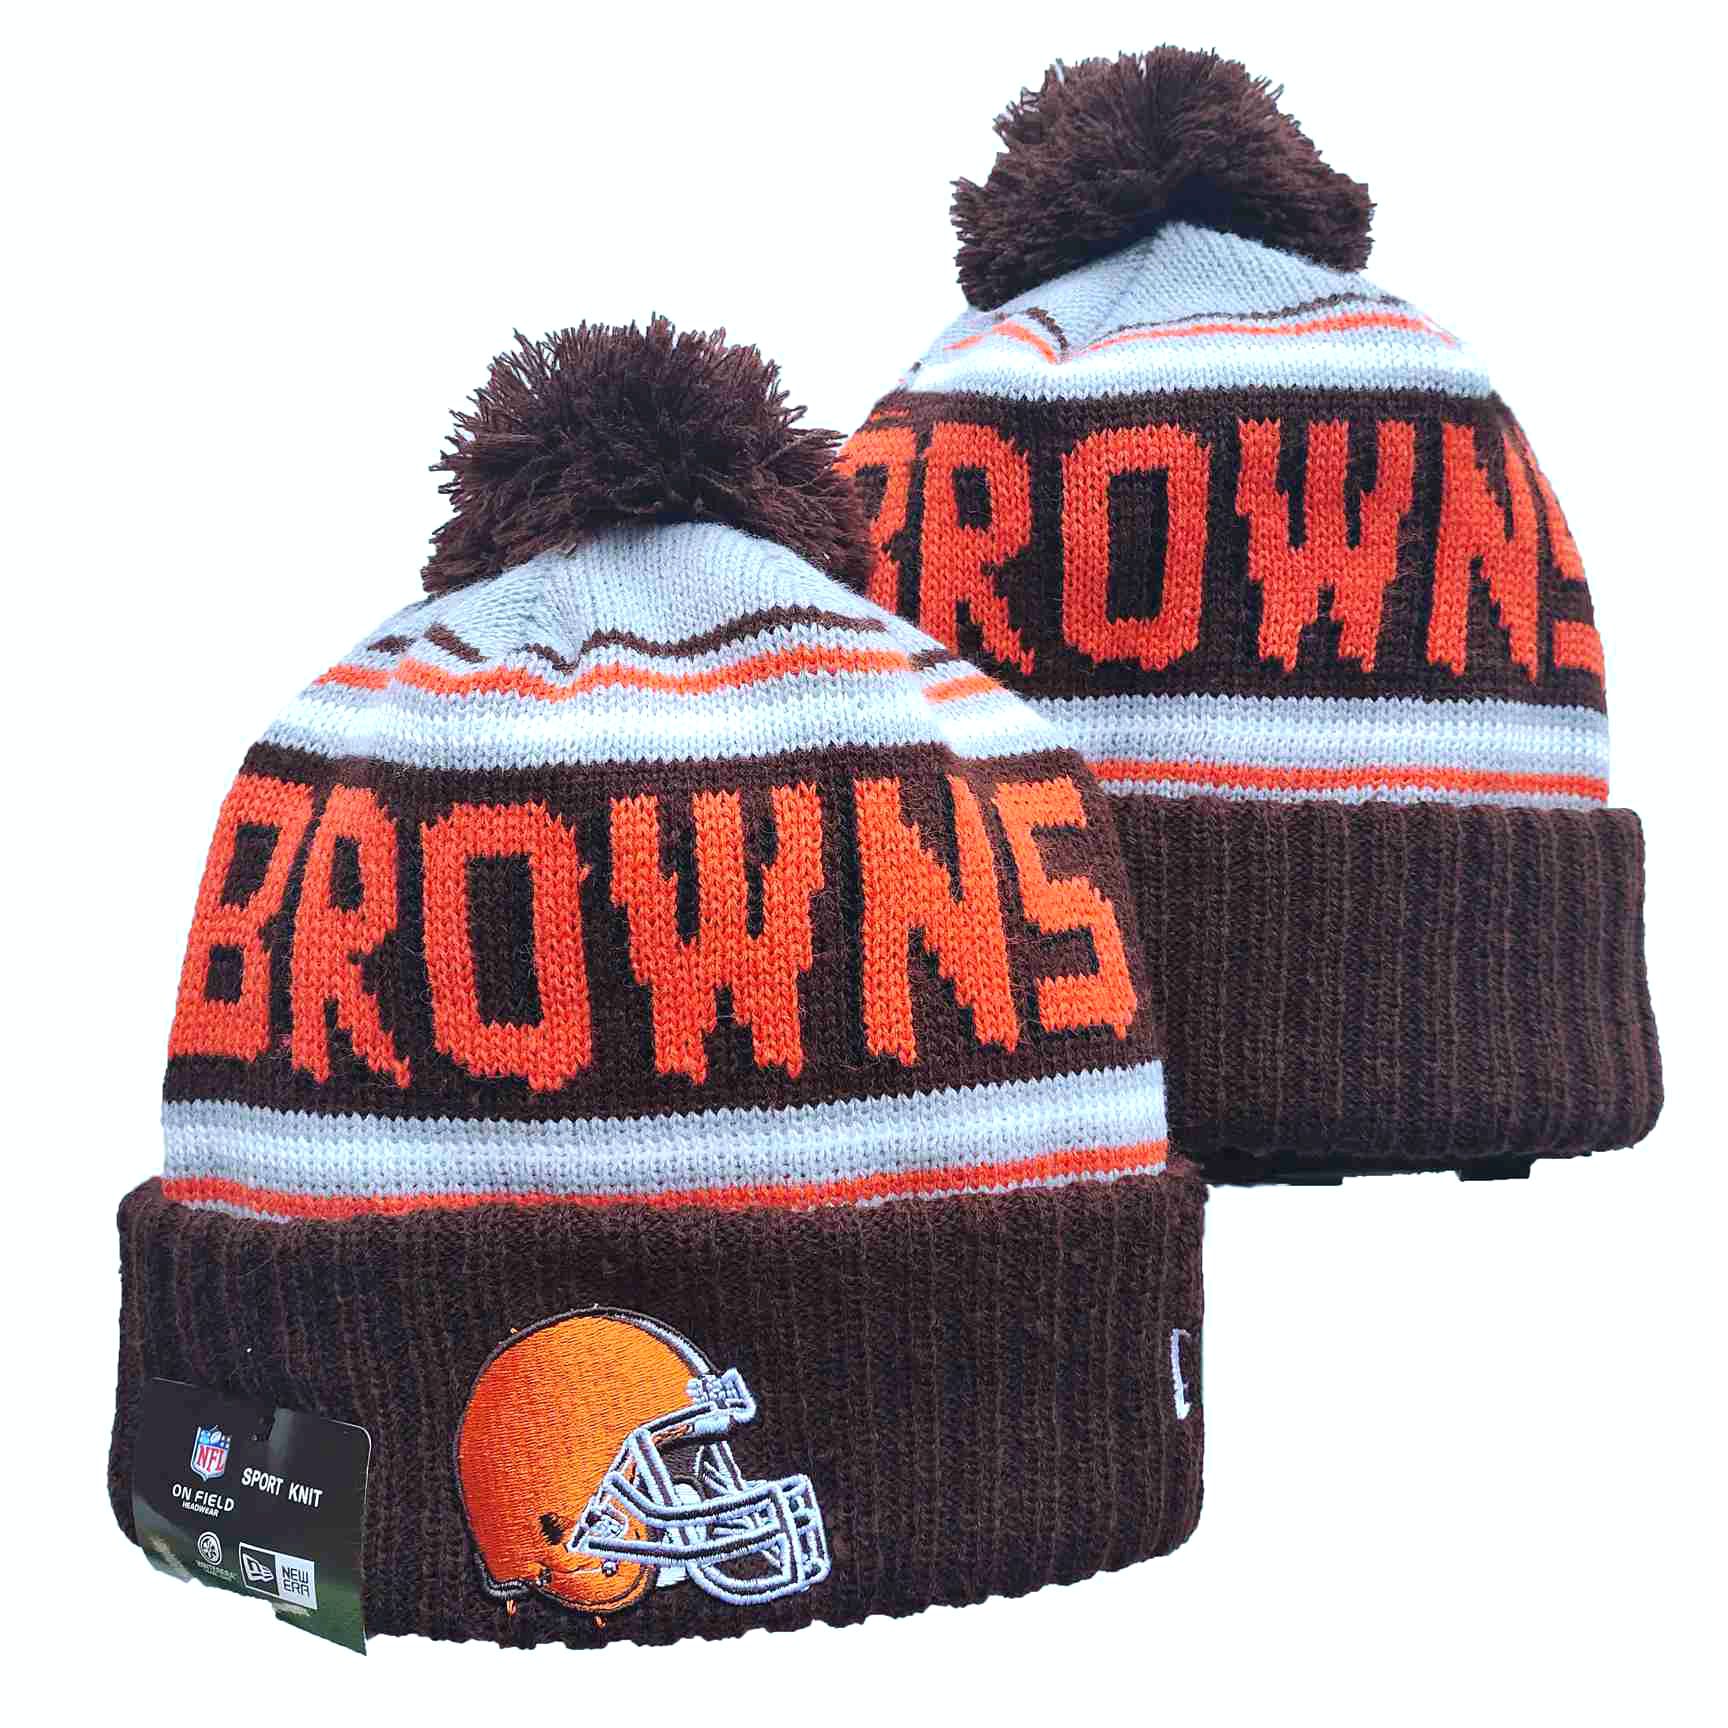 NFL Cleveland Browns Beanies Knit Hats-YD1300